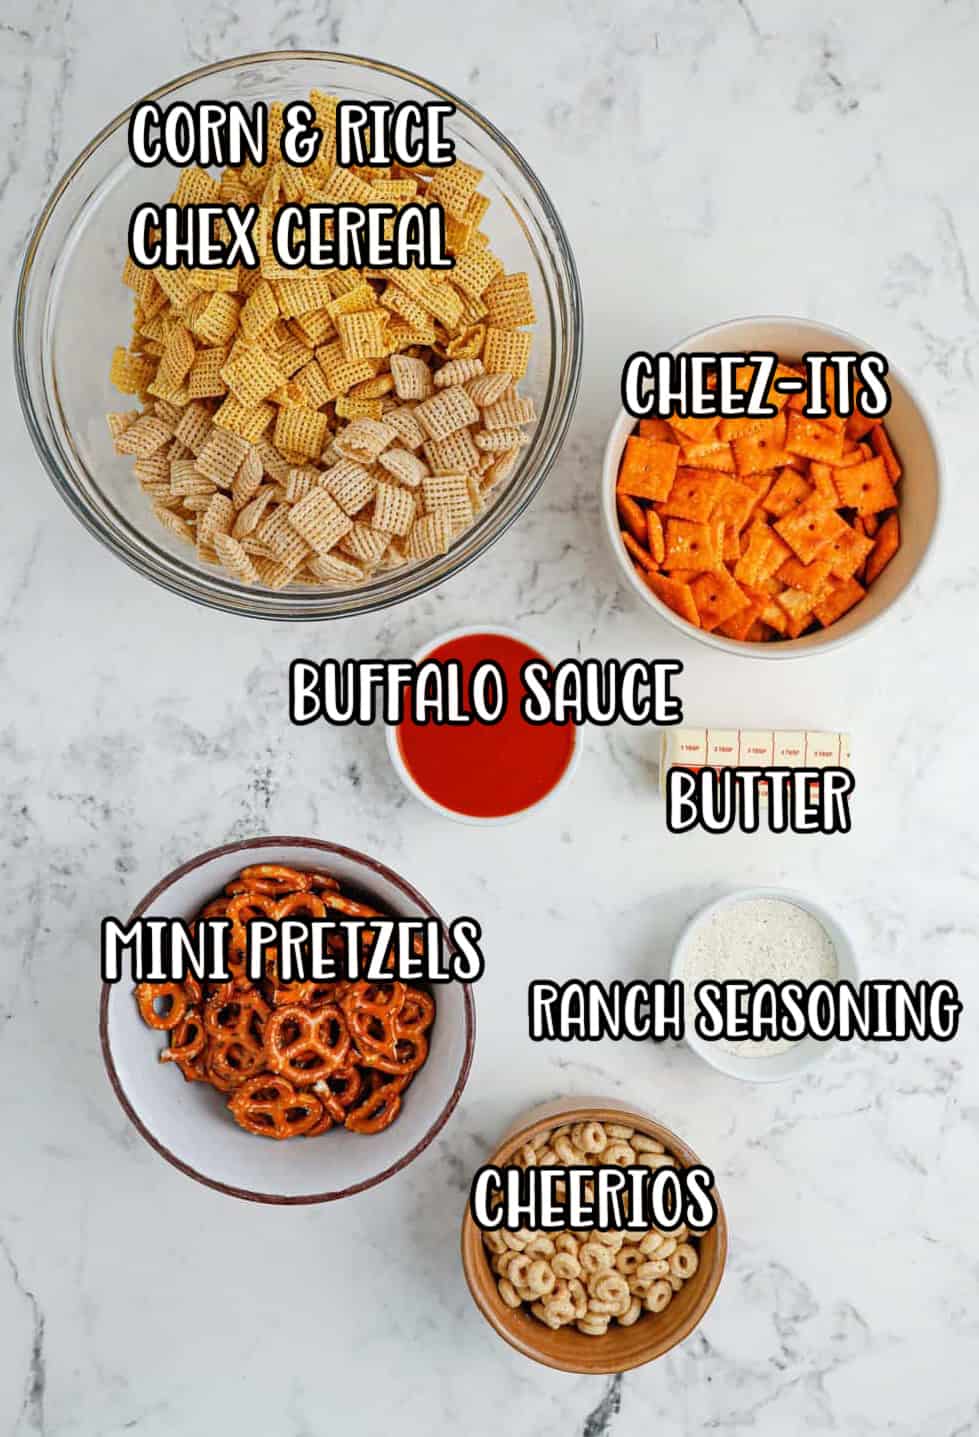 Rice chex cereal, corn chex cereal, Cheez-its, pretzel twists, Cheerios, butter, buffalo sauce and ranch seasoning.